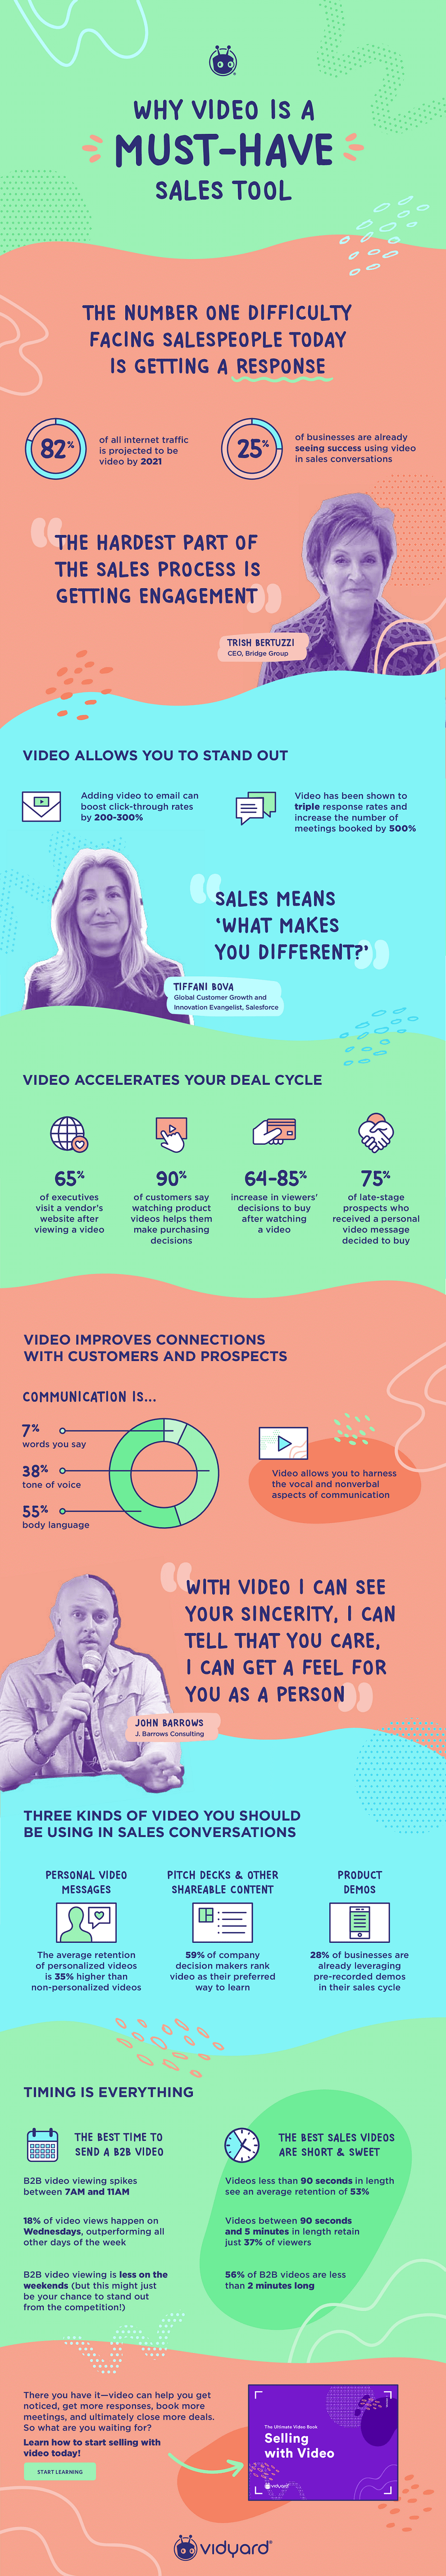 Video marketing can help your business stand out, skyrocket response rates, improve engagement with prospects, and close more deals. This infographic illustrates why video is a must-have sales tool that your brand should be using!